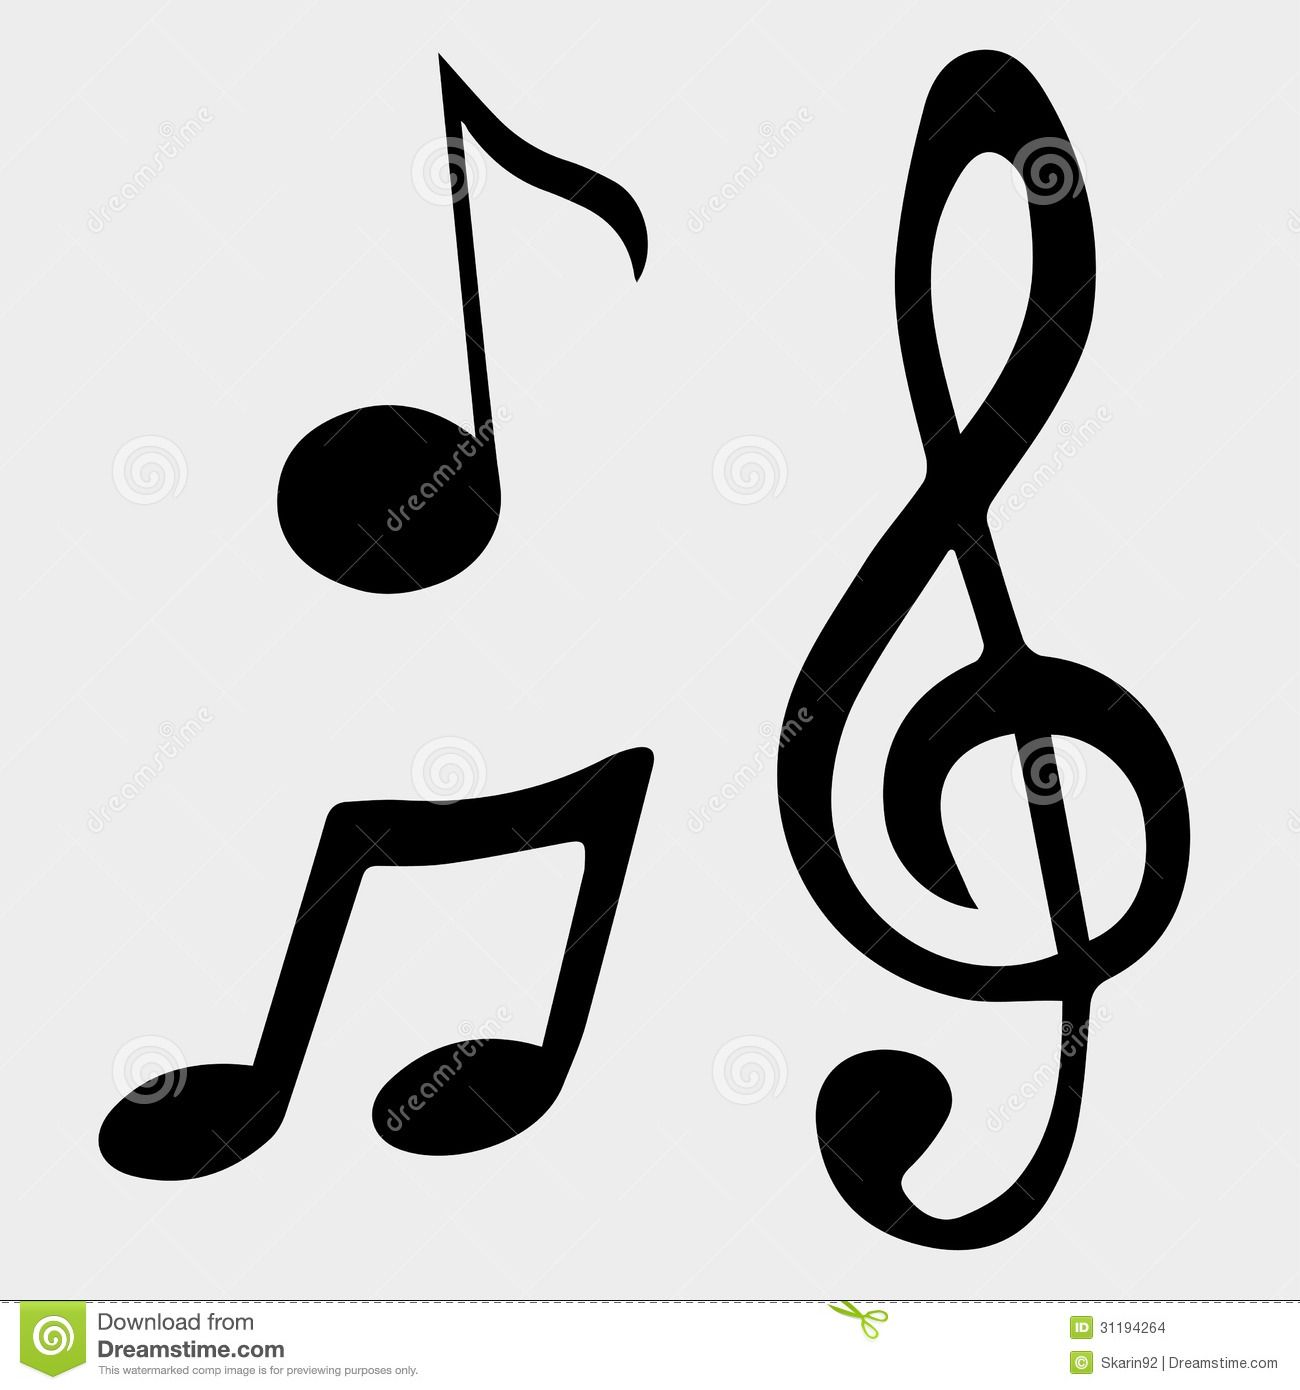 Music Notes Svg Vector Image